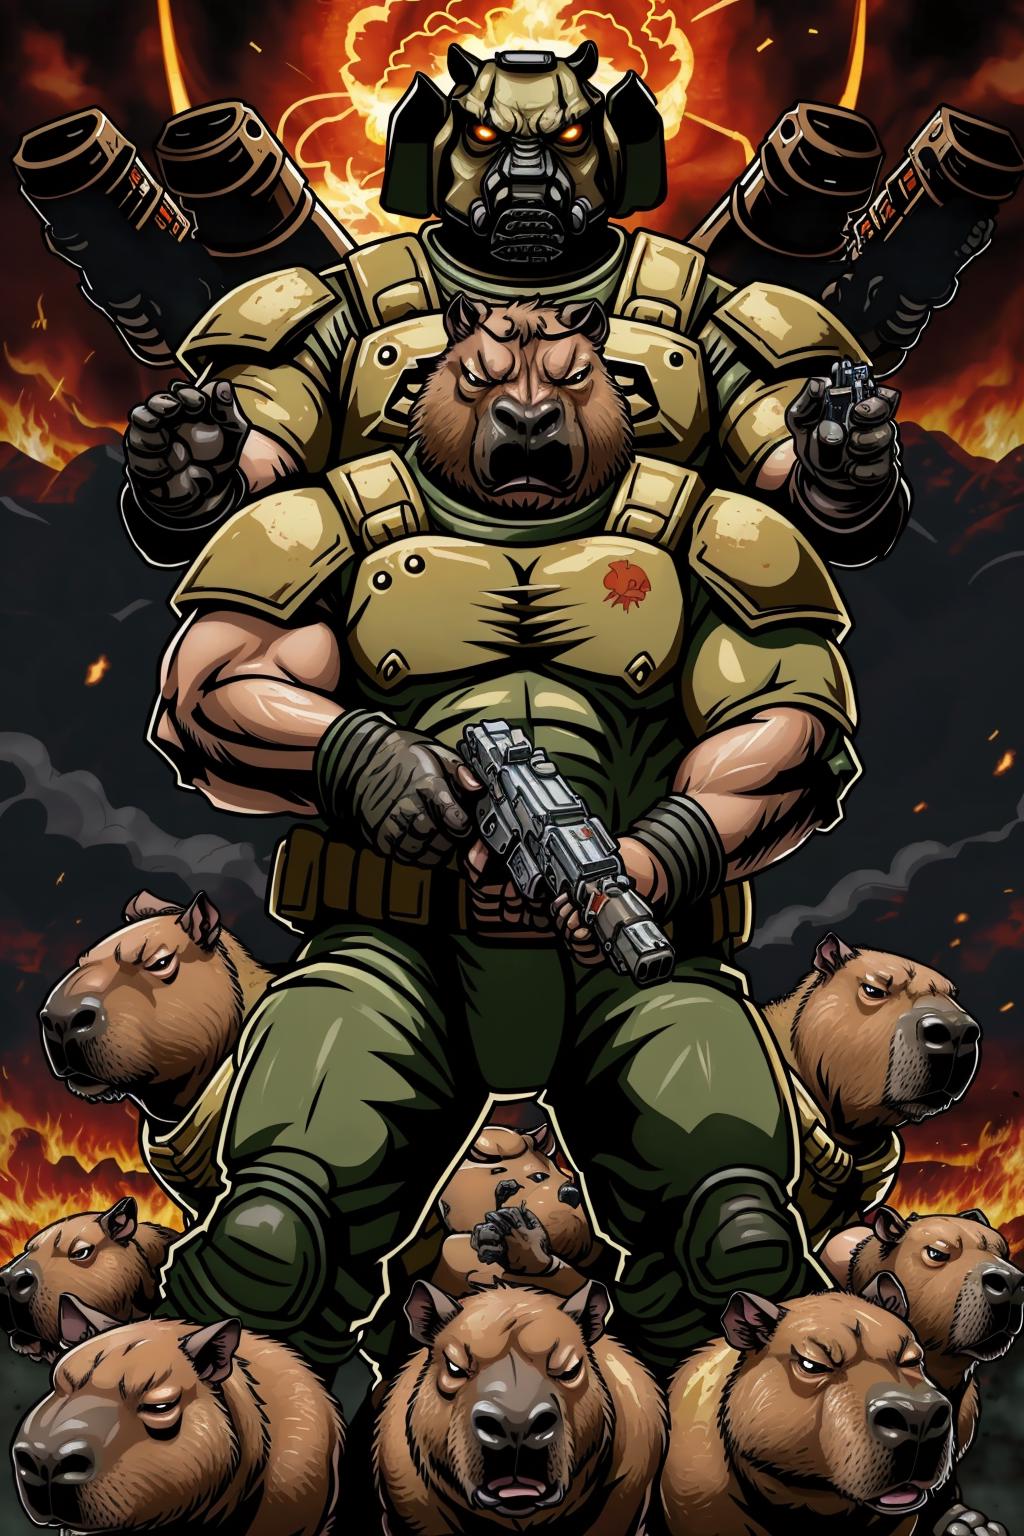 Anime-style cartoon drawing of a soldier holding a gun, with multiple bears surrounding him.